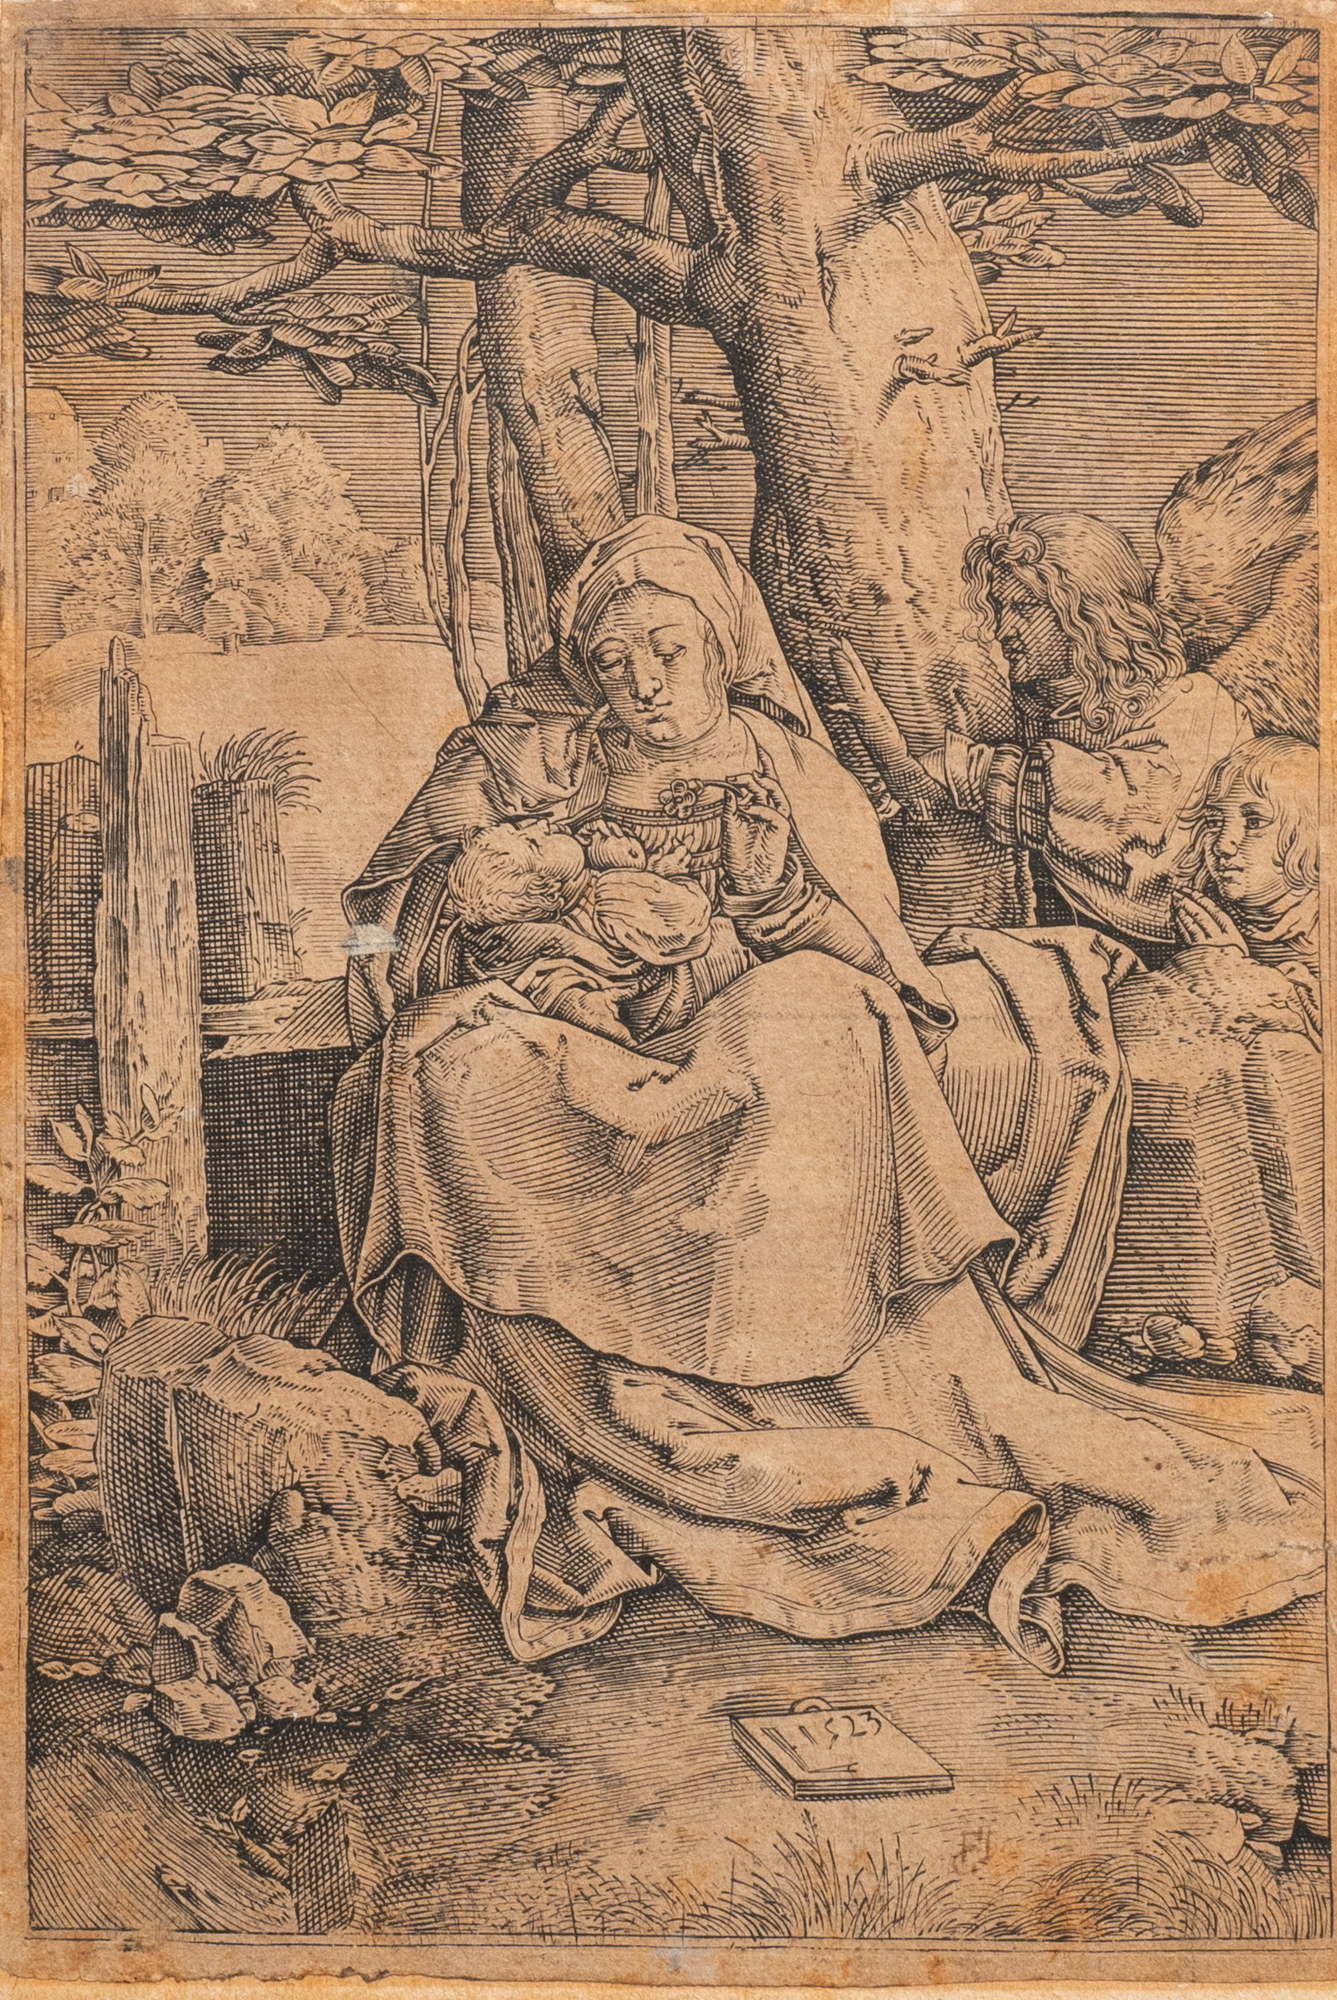 After Lucas van Leyden (1494 - 1533), etching on paper, 16th C.: The Virgin and Child with two angel